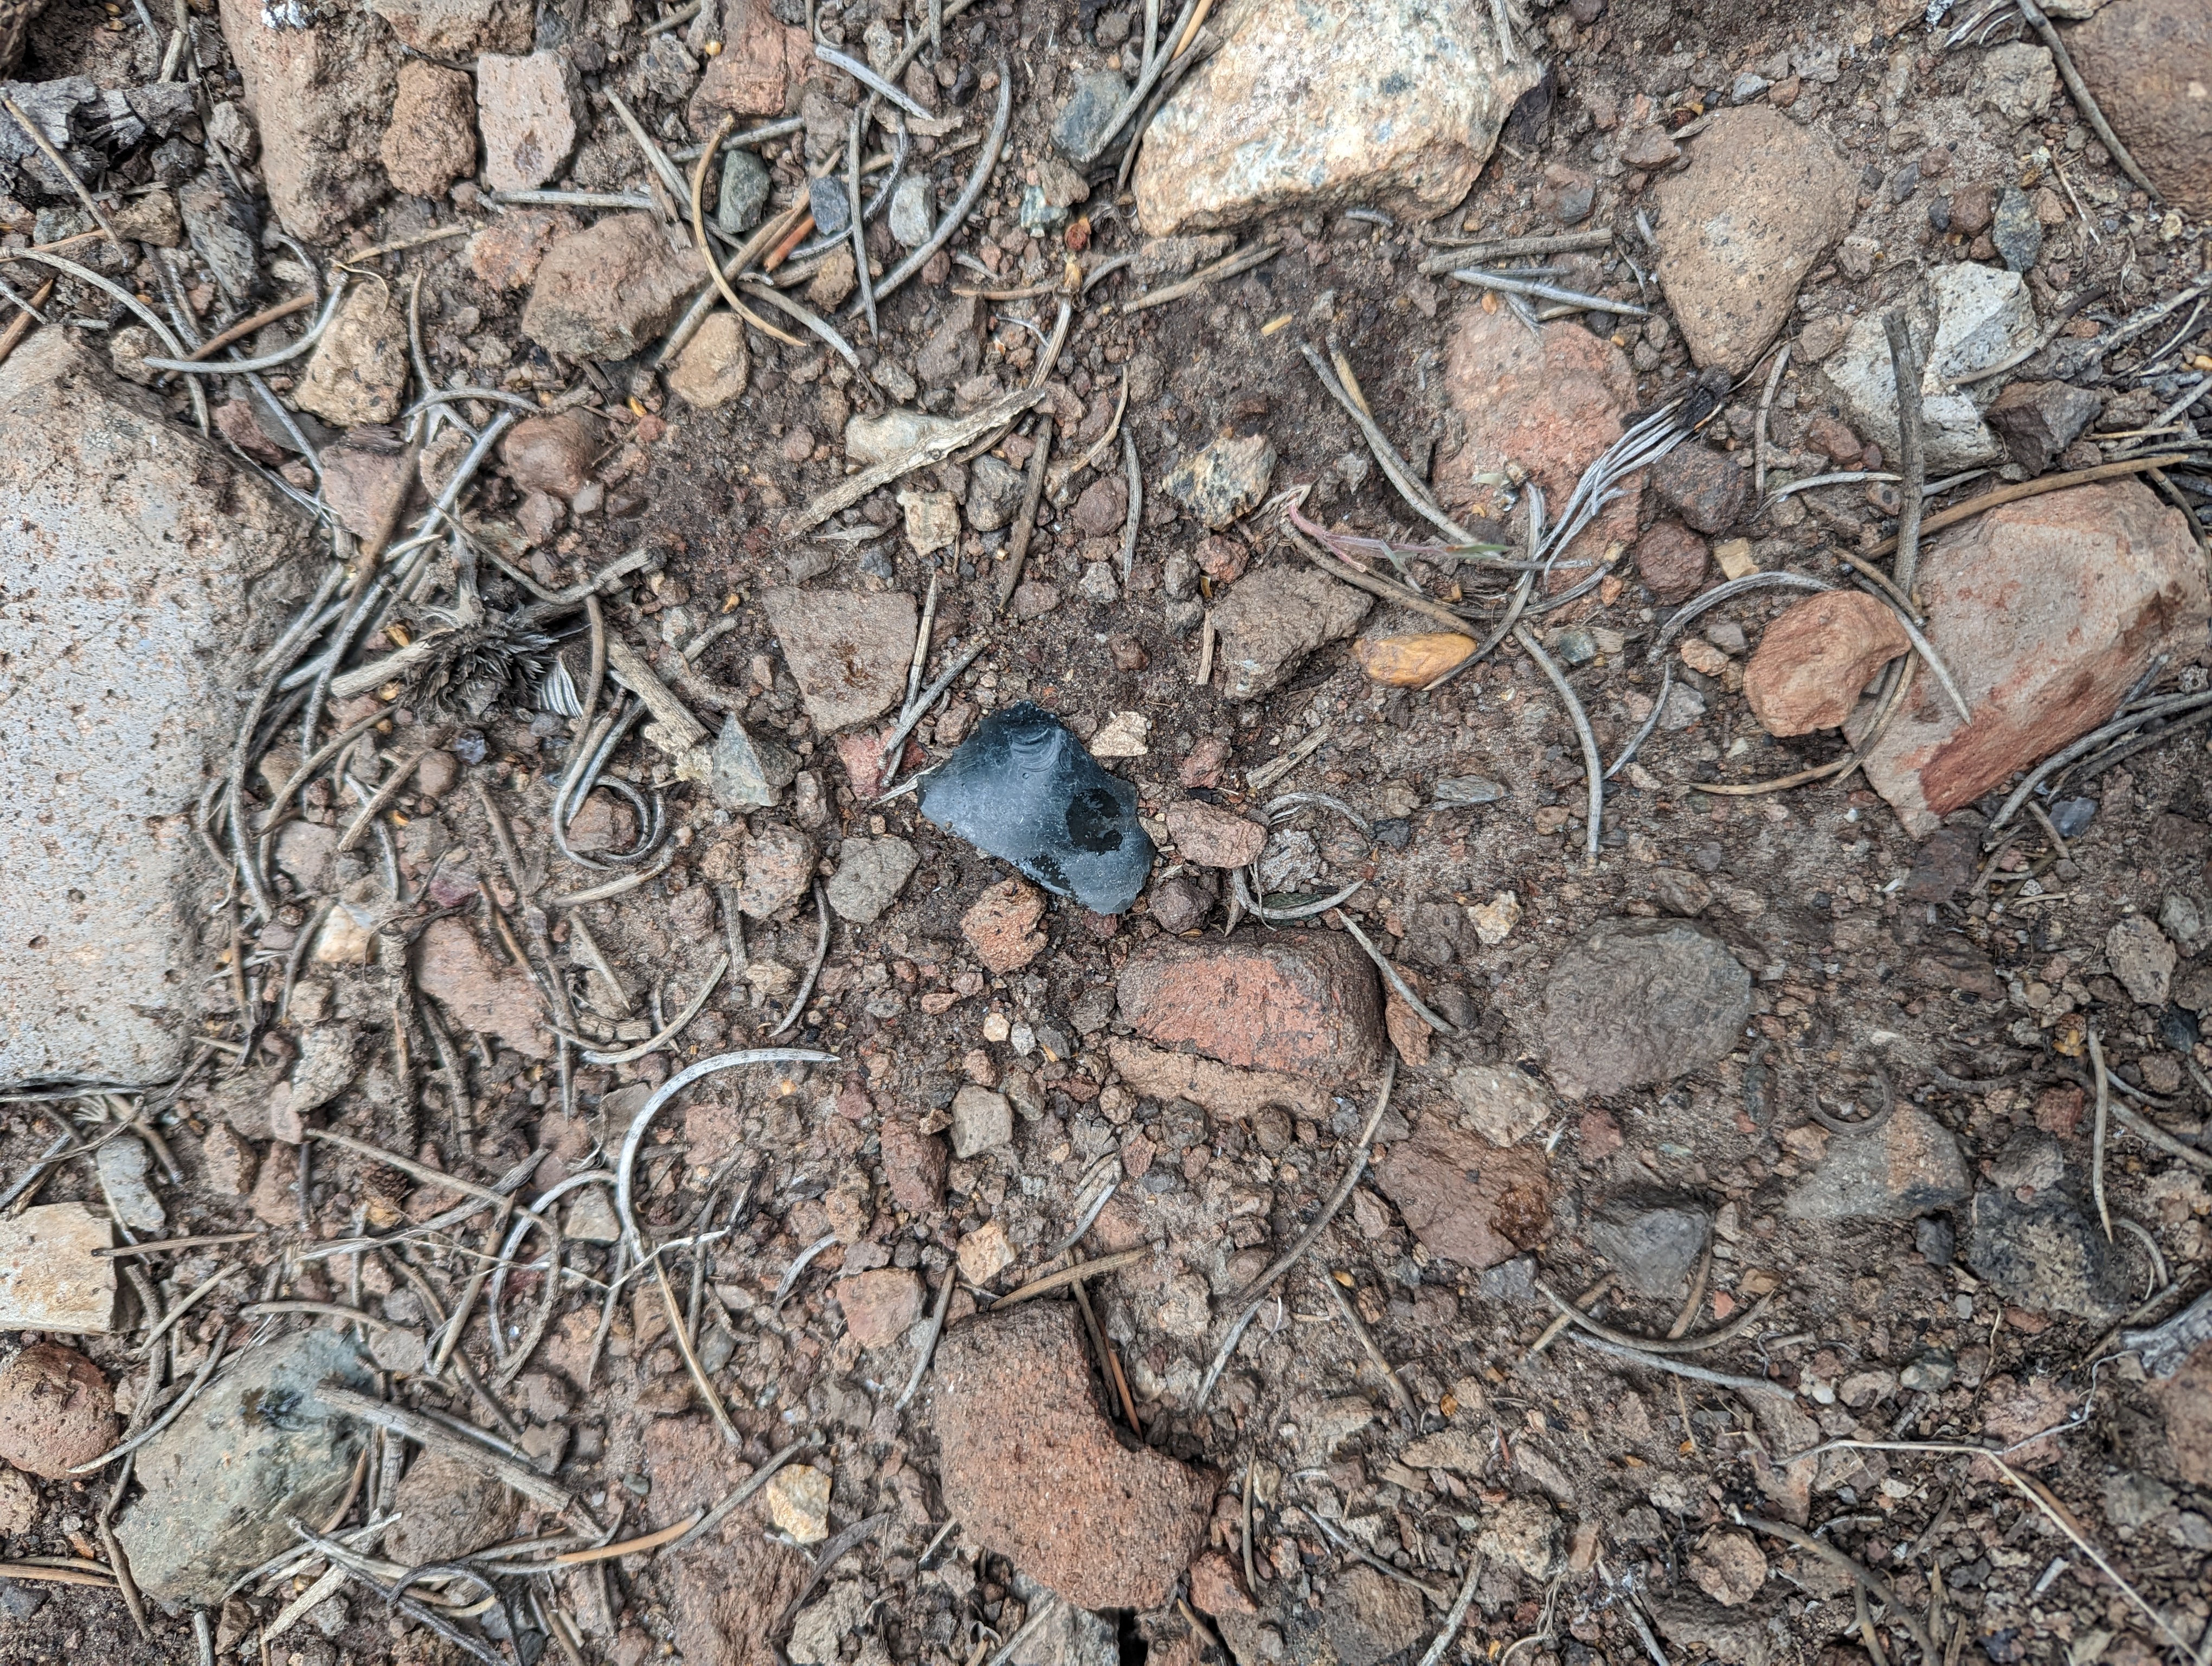 One of many obsidian flakes I saw in a small area